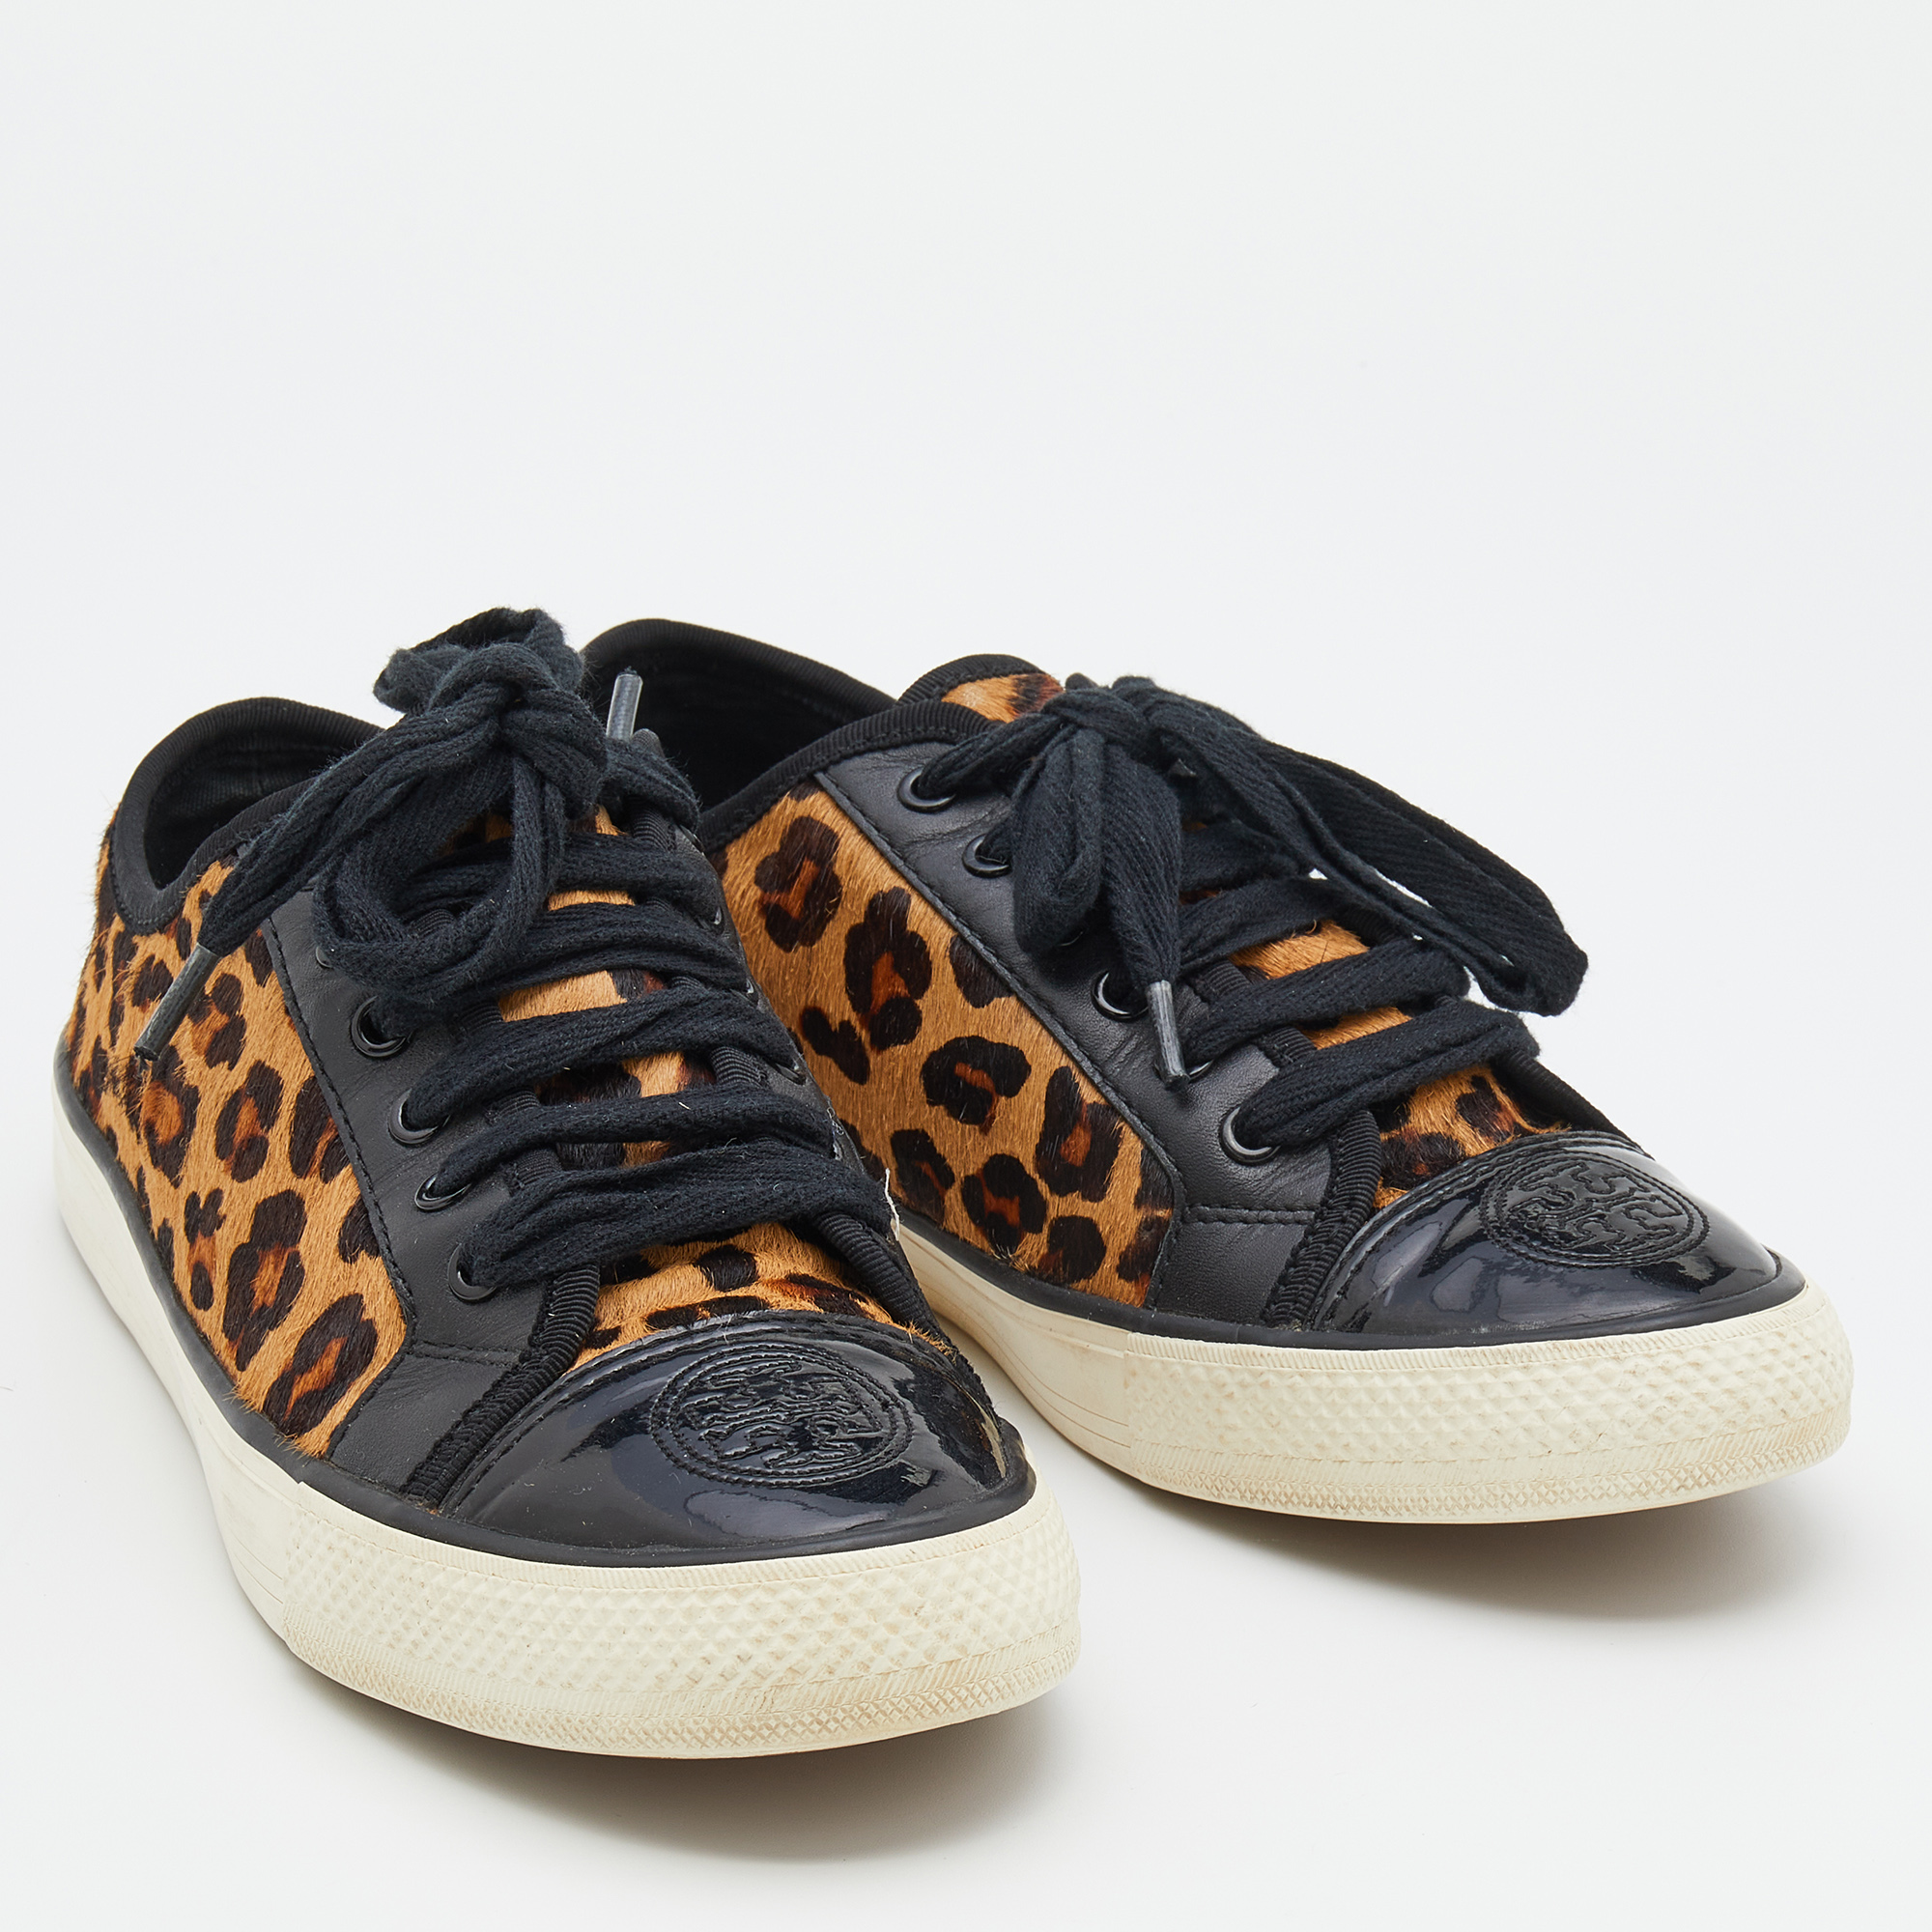 Tory Burch Black/Brown Leopard Print Calf Hair And Leather Low Top Sneakers Size 38